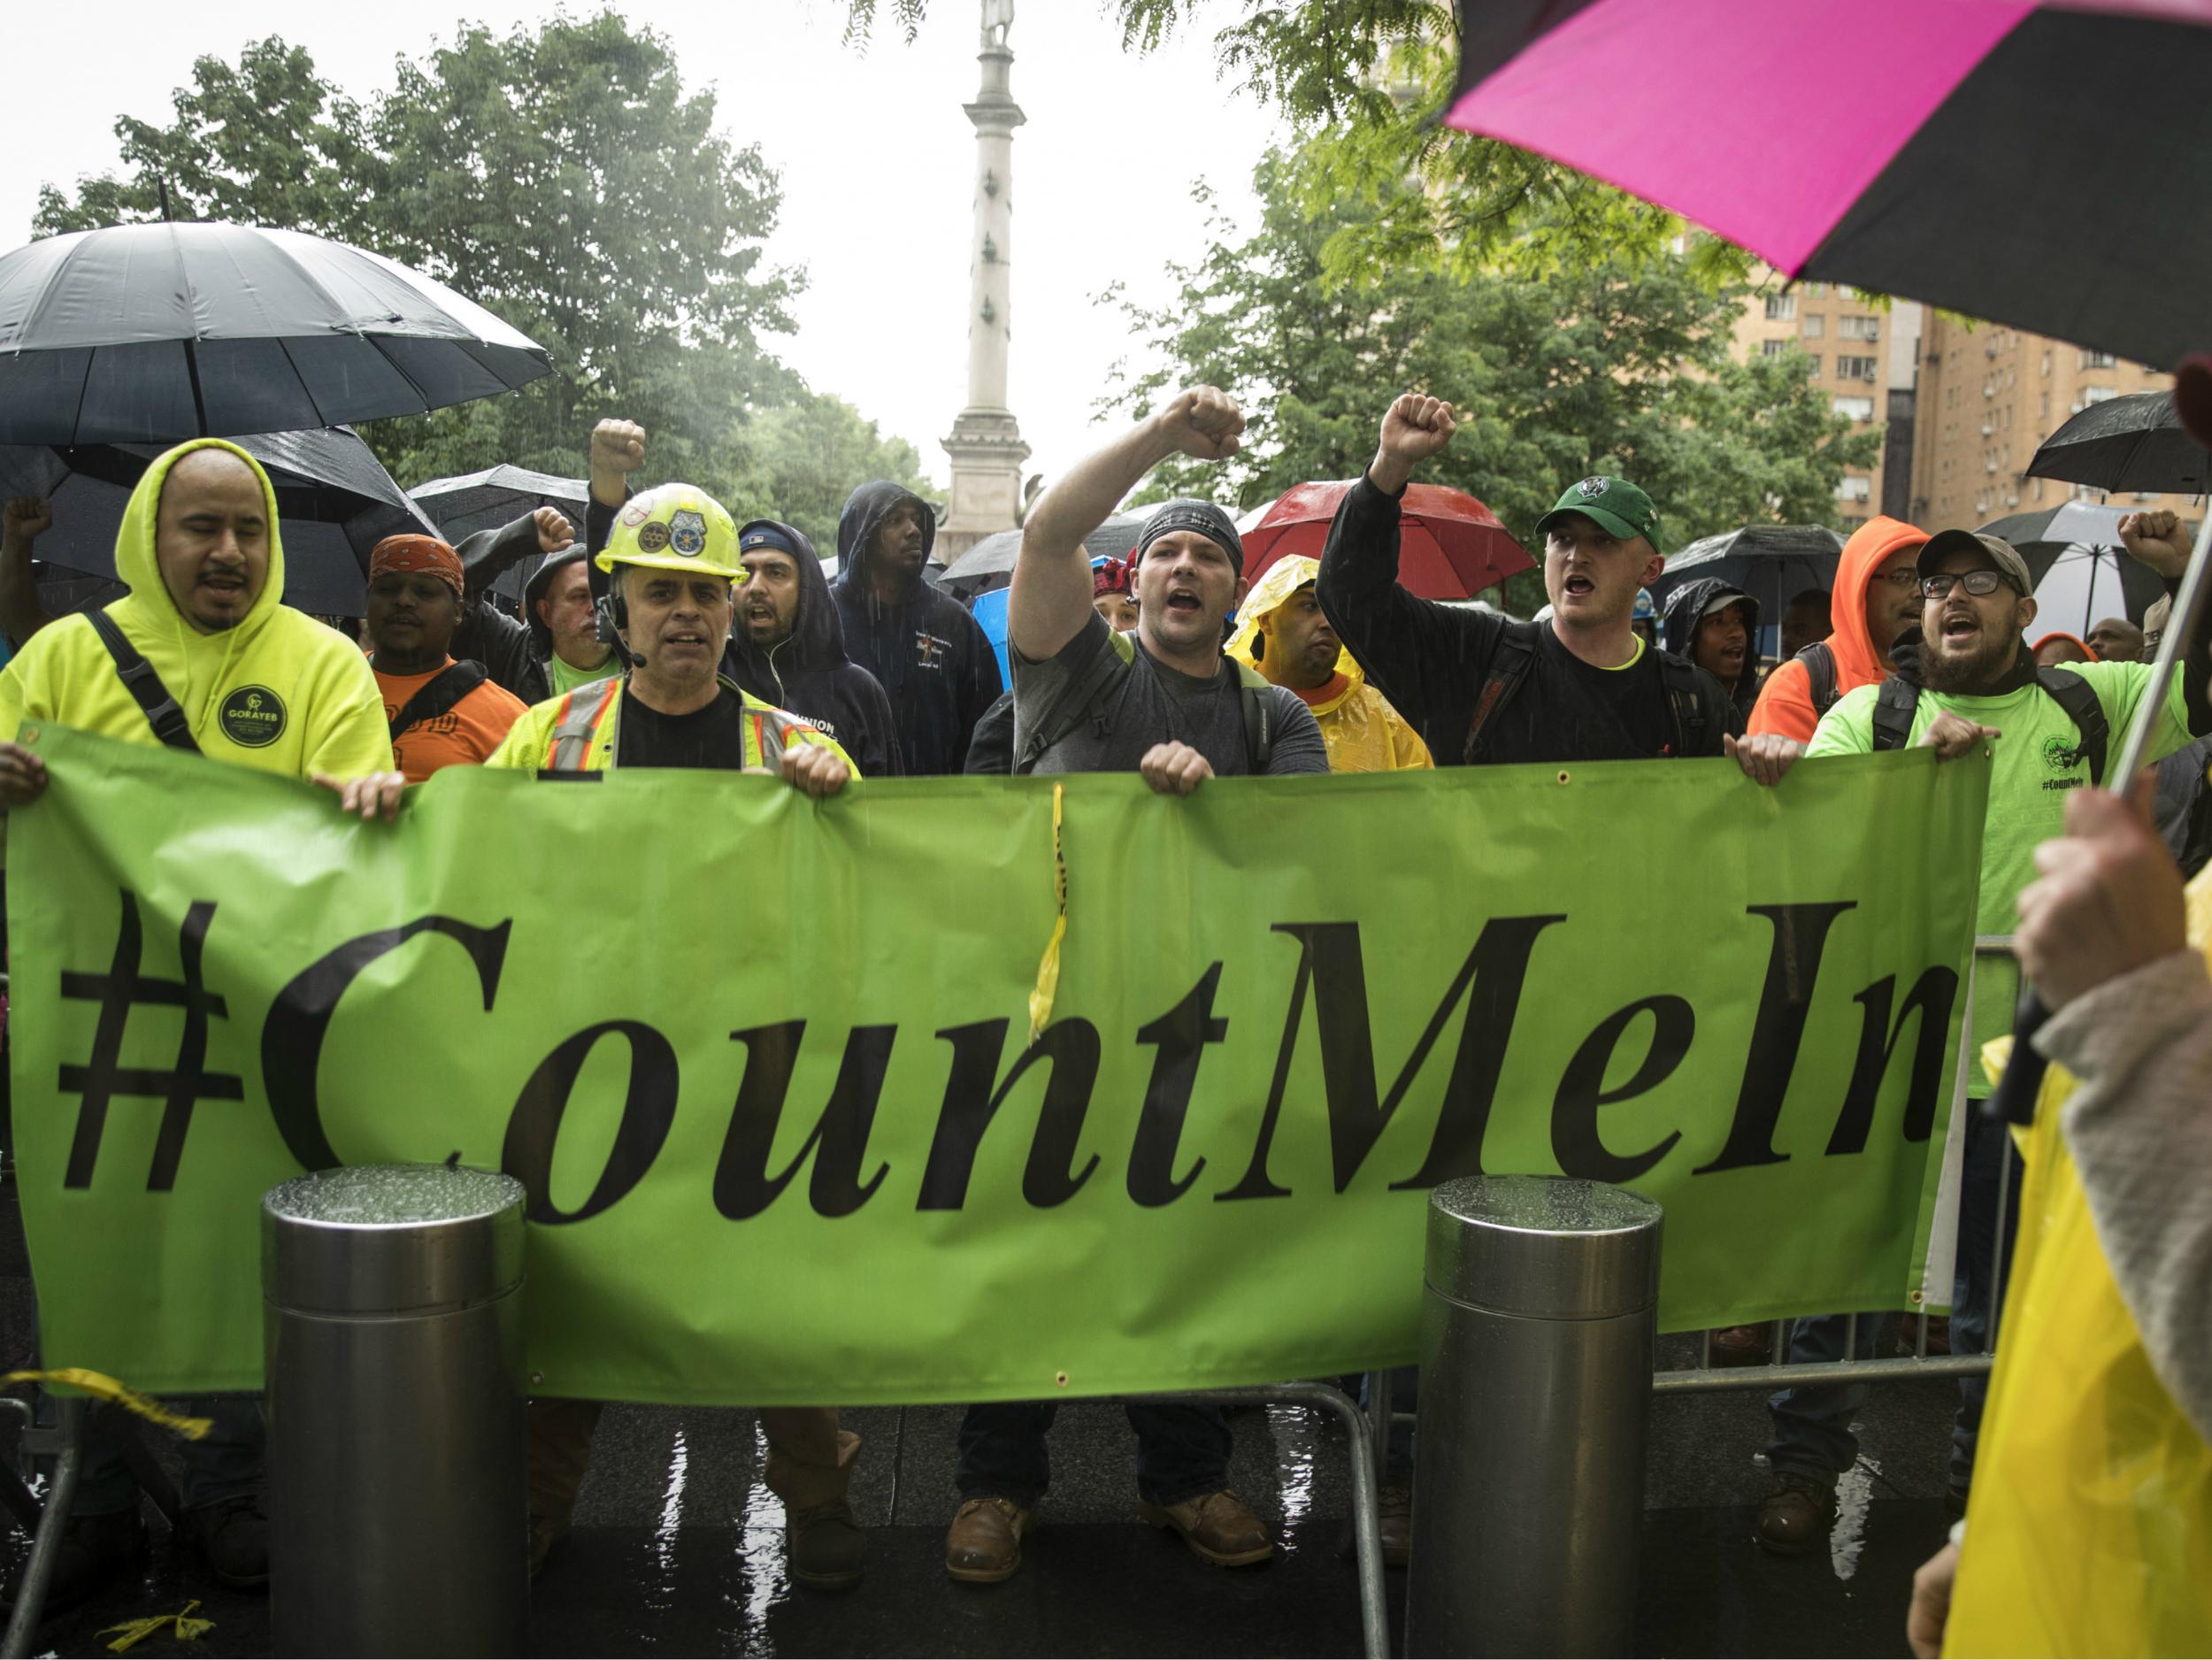 Construction workers and union members hold a rally in New York City ahead of the Supreme Court ruling in the Janus v. AFSCME case, which gave government workers nationwide the choice of opting out of paying union fees even if they benefit from the union's contract negotiations.